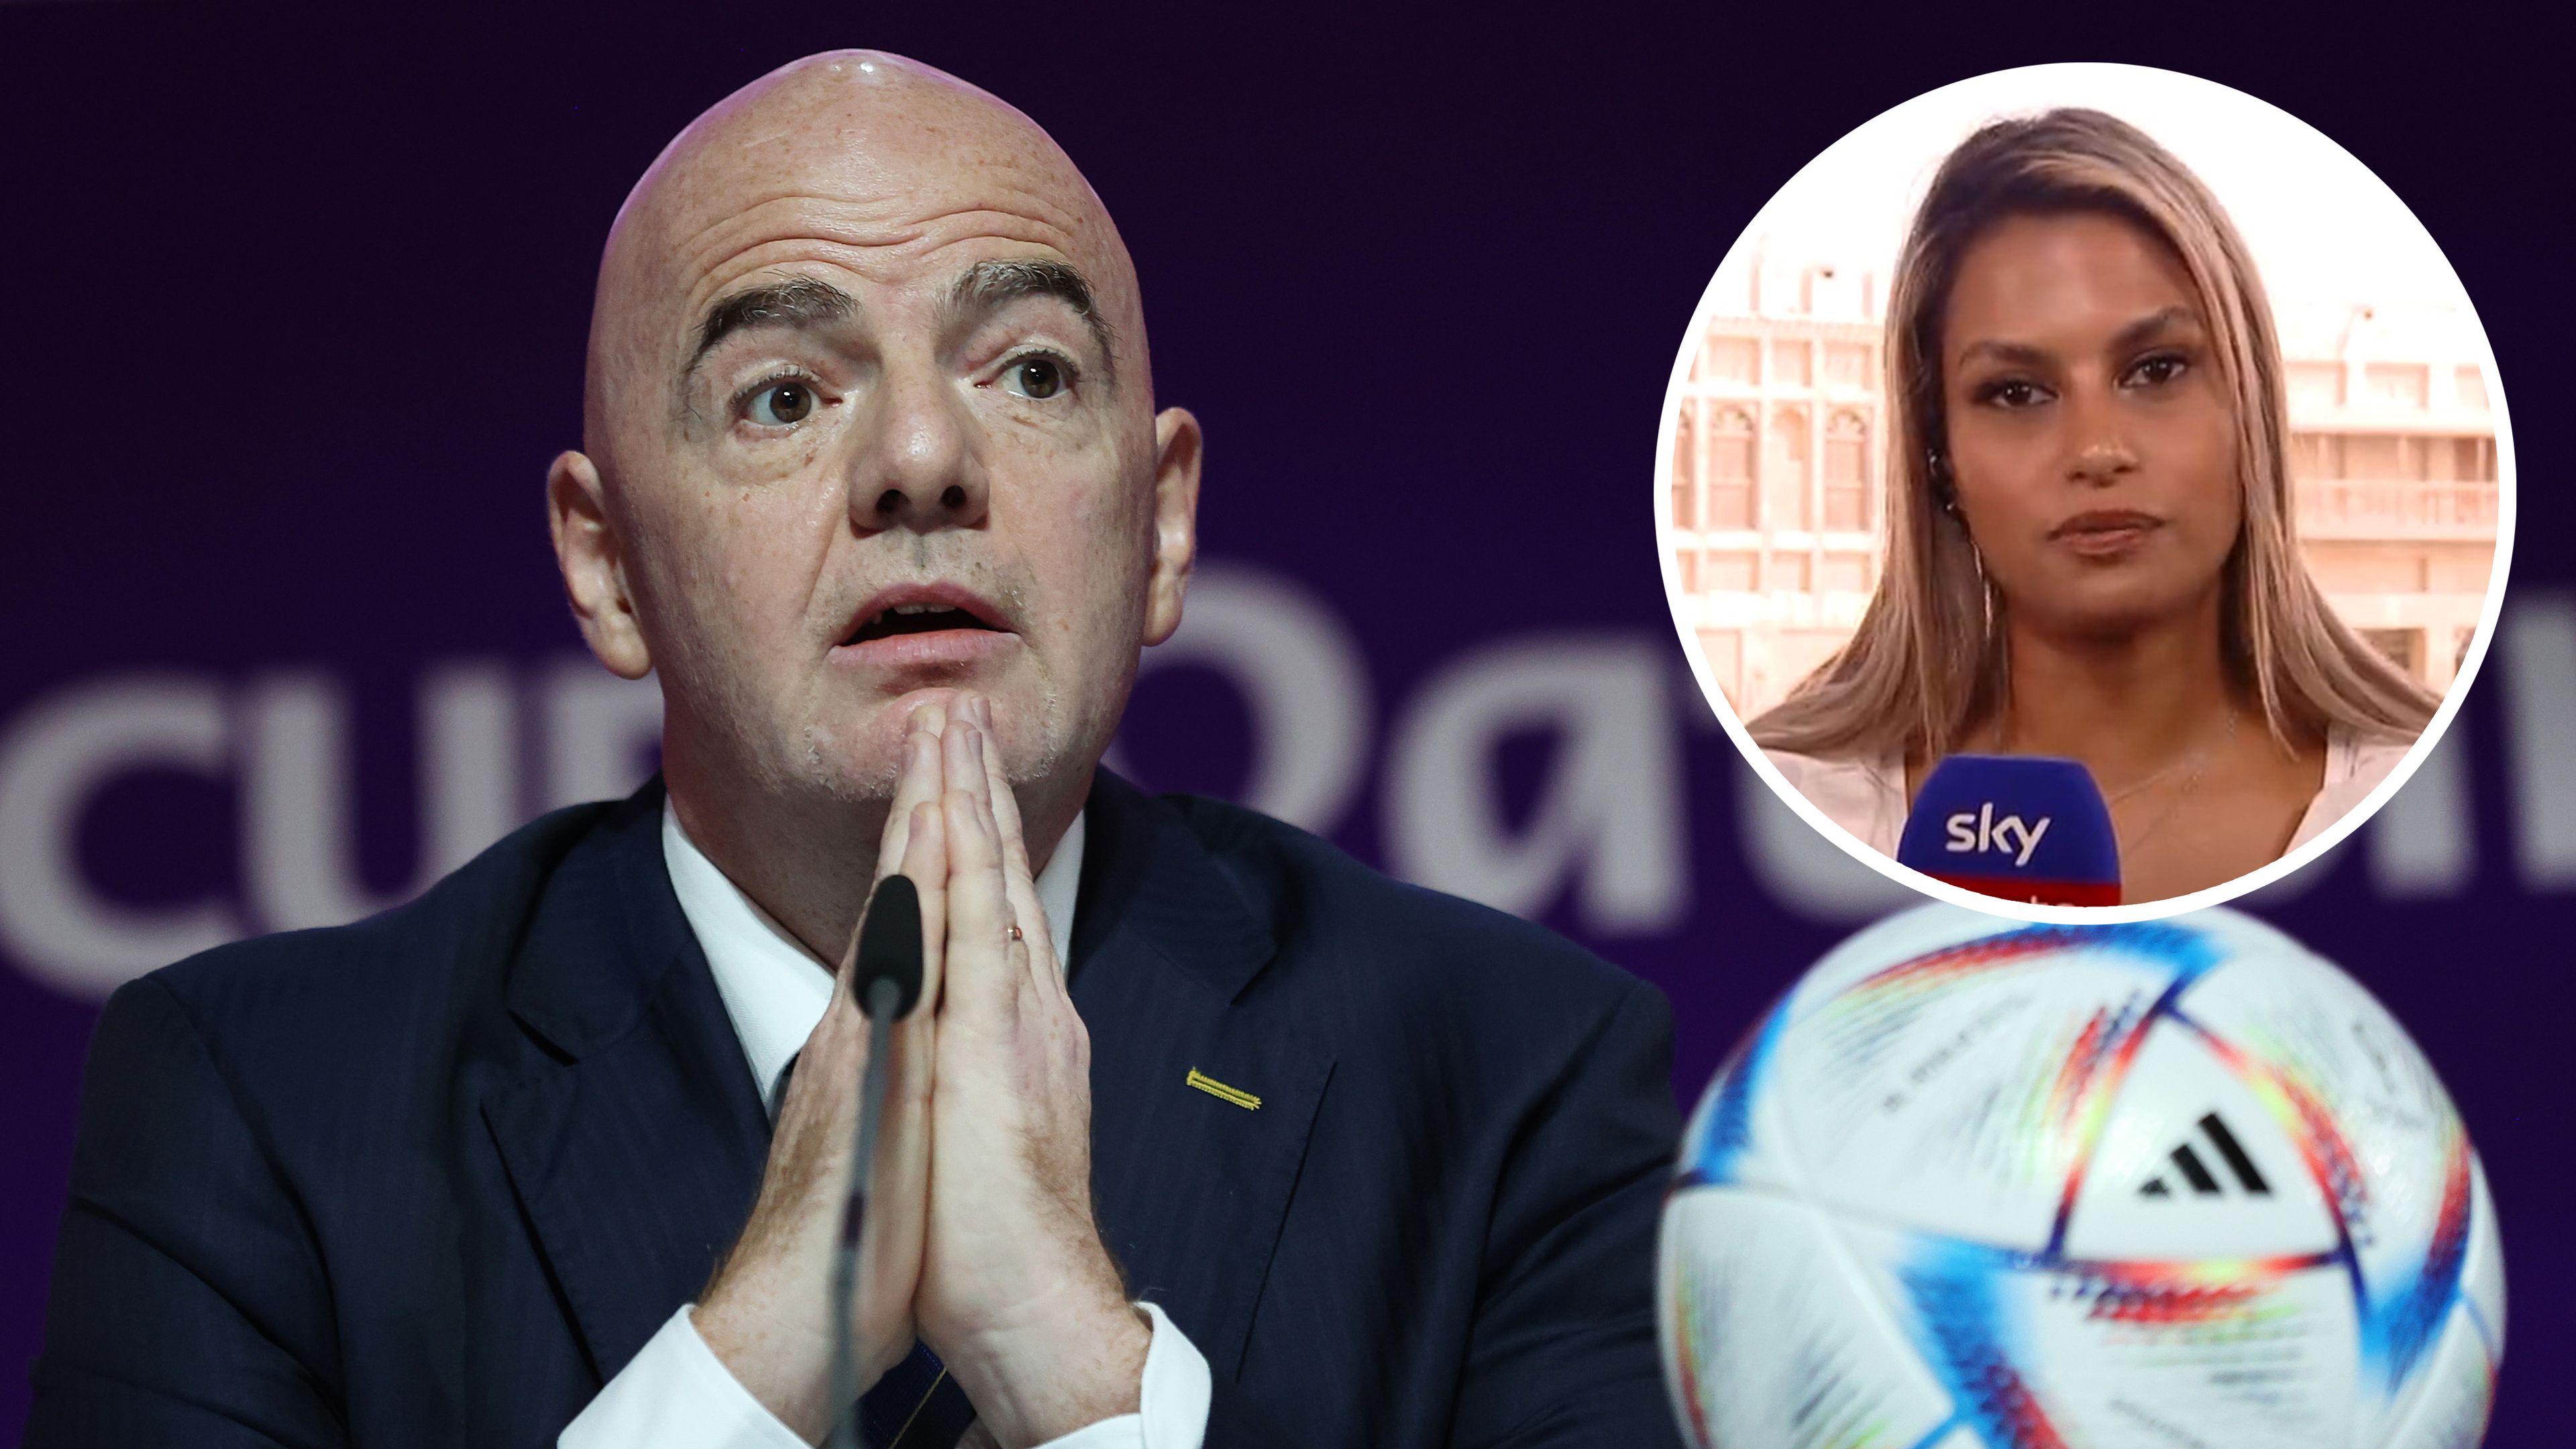 FIFA president Gianni Infantino's 'offensive' speech highlights 'how dirty the game is'